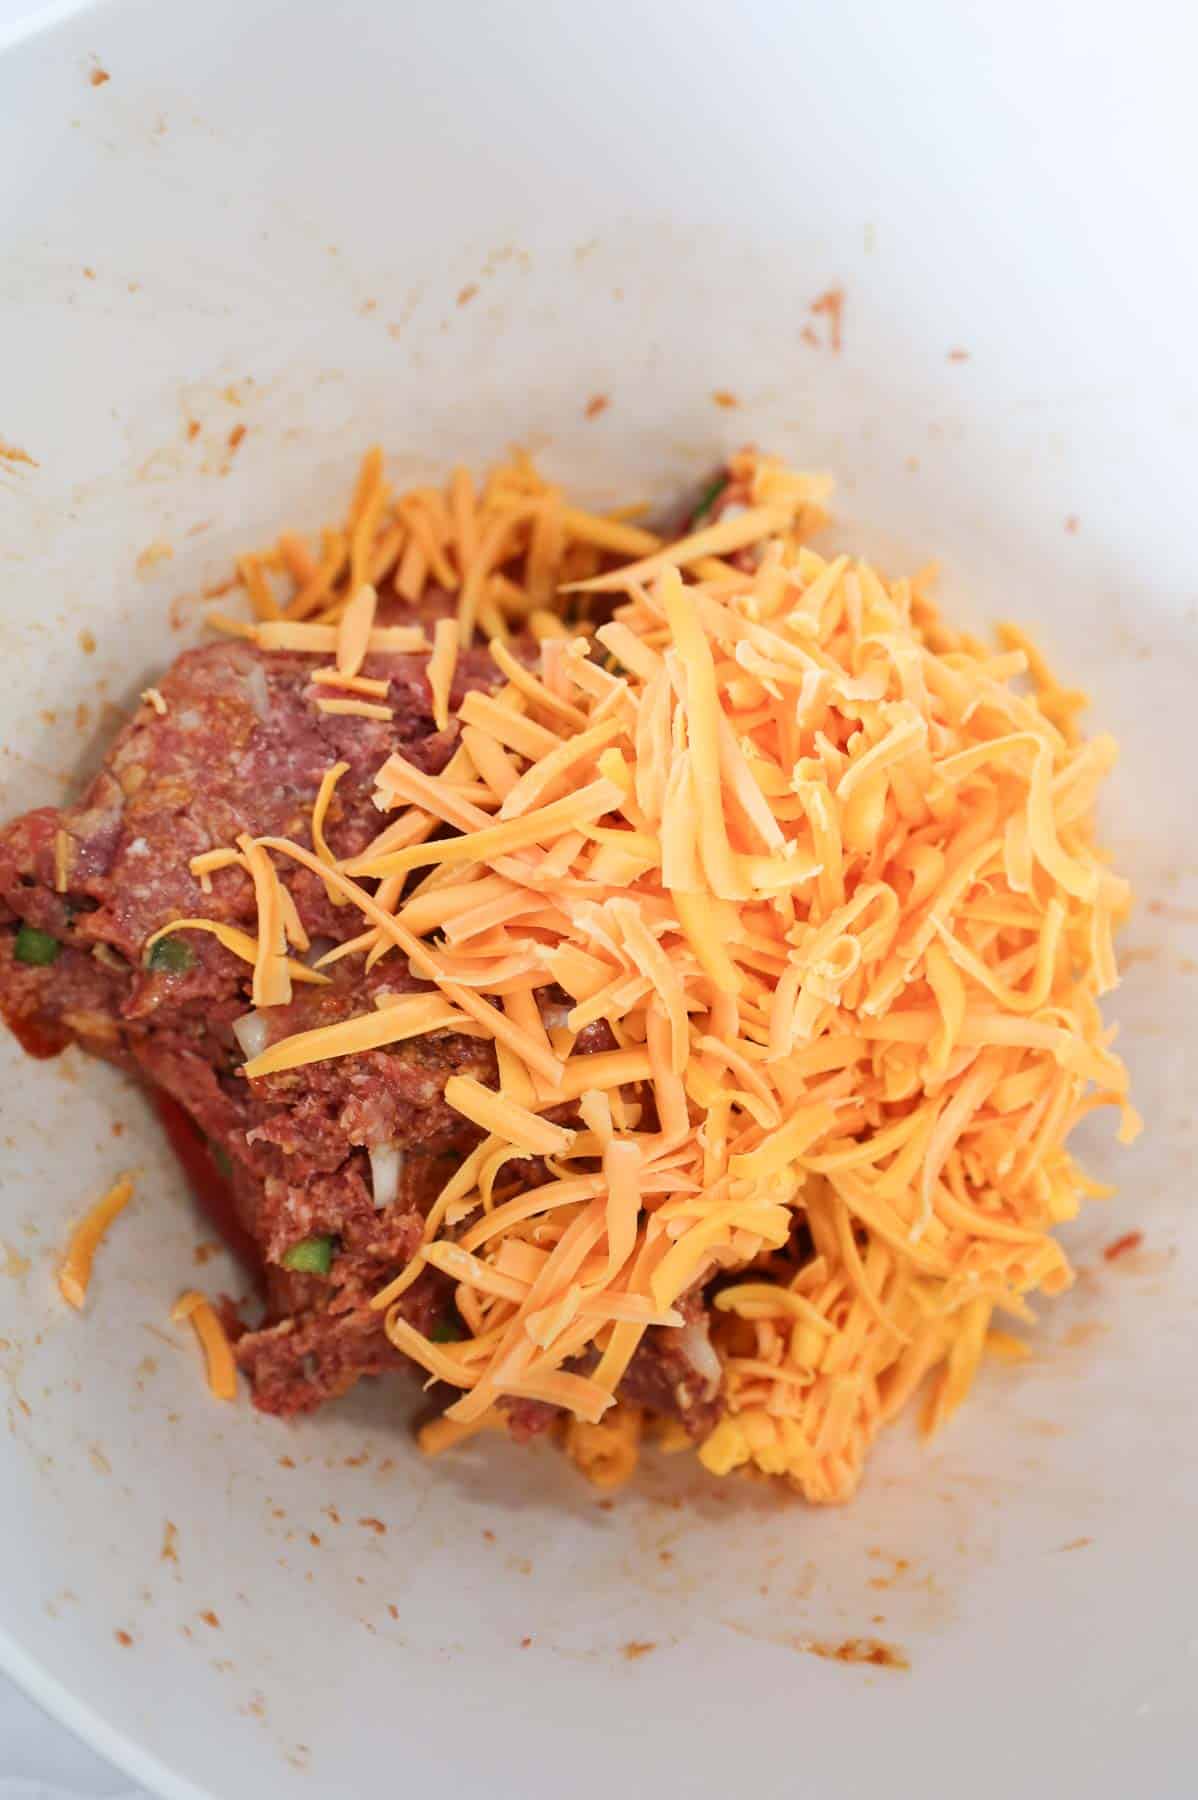 shredded cheddar cheese on top of raw meatloaf mixture in a mixing bowl